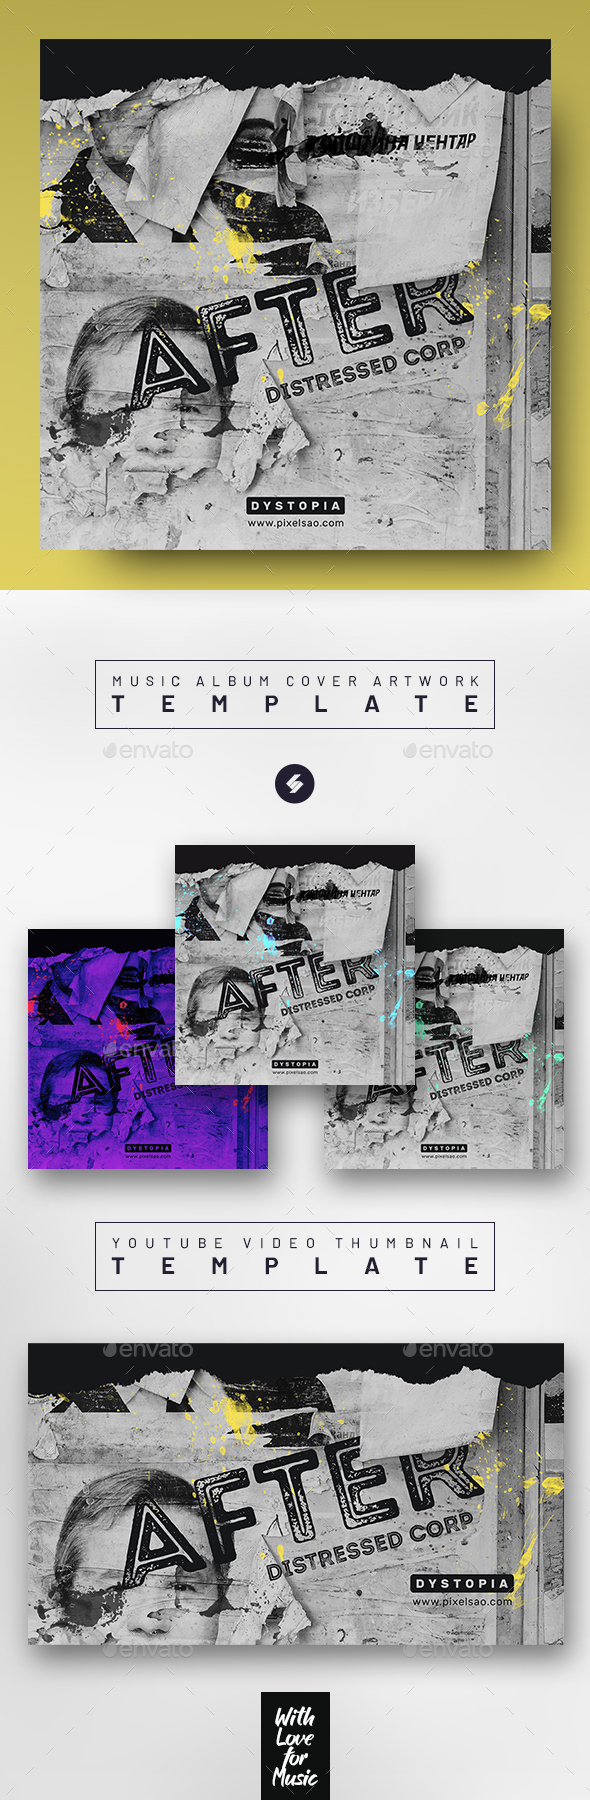 After – Music Album Cover Artwork / Video Thumbnail Template